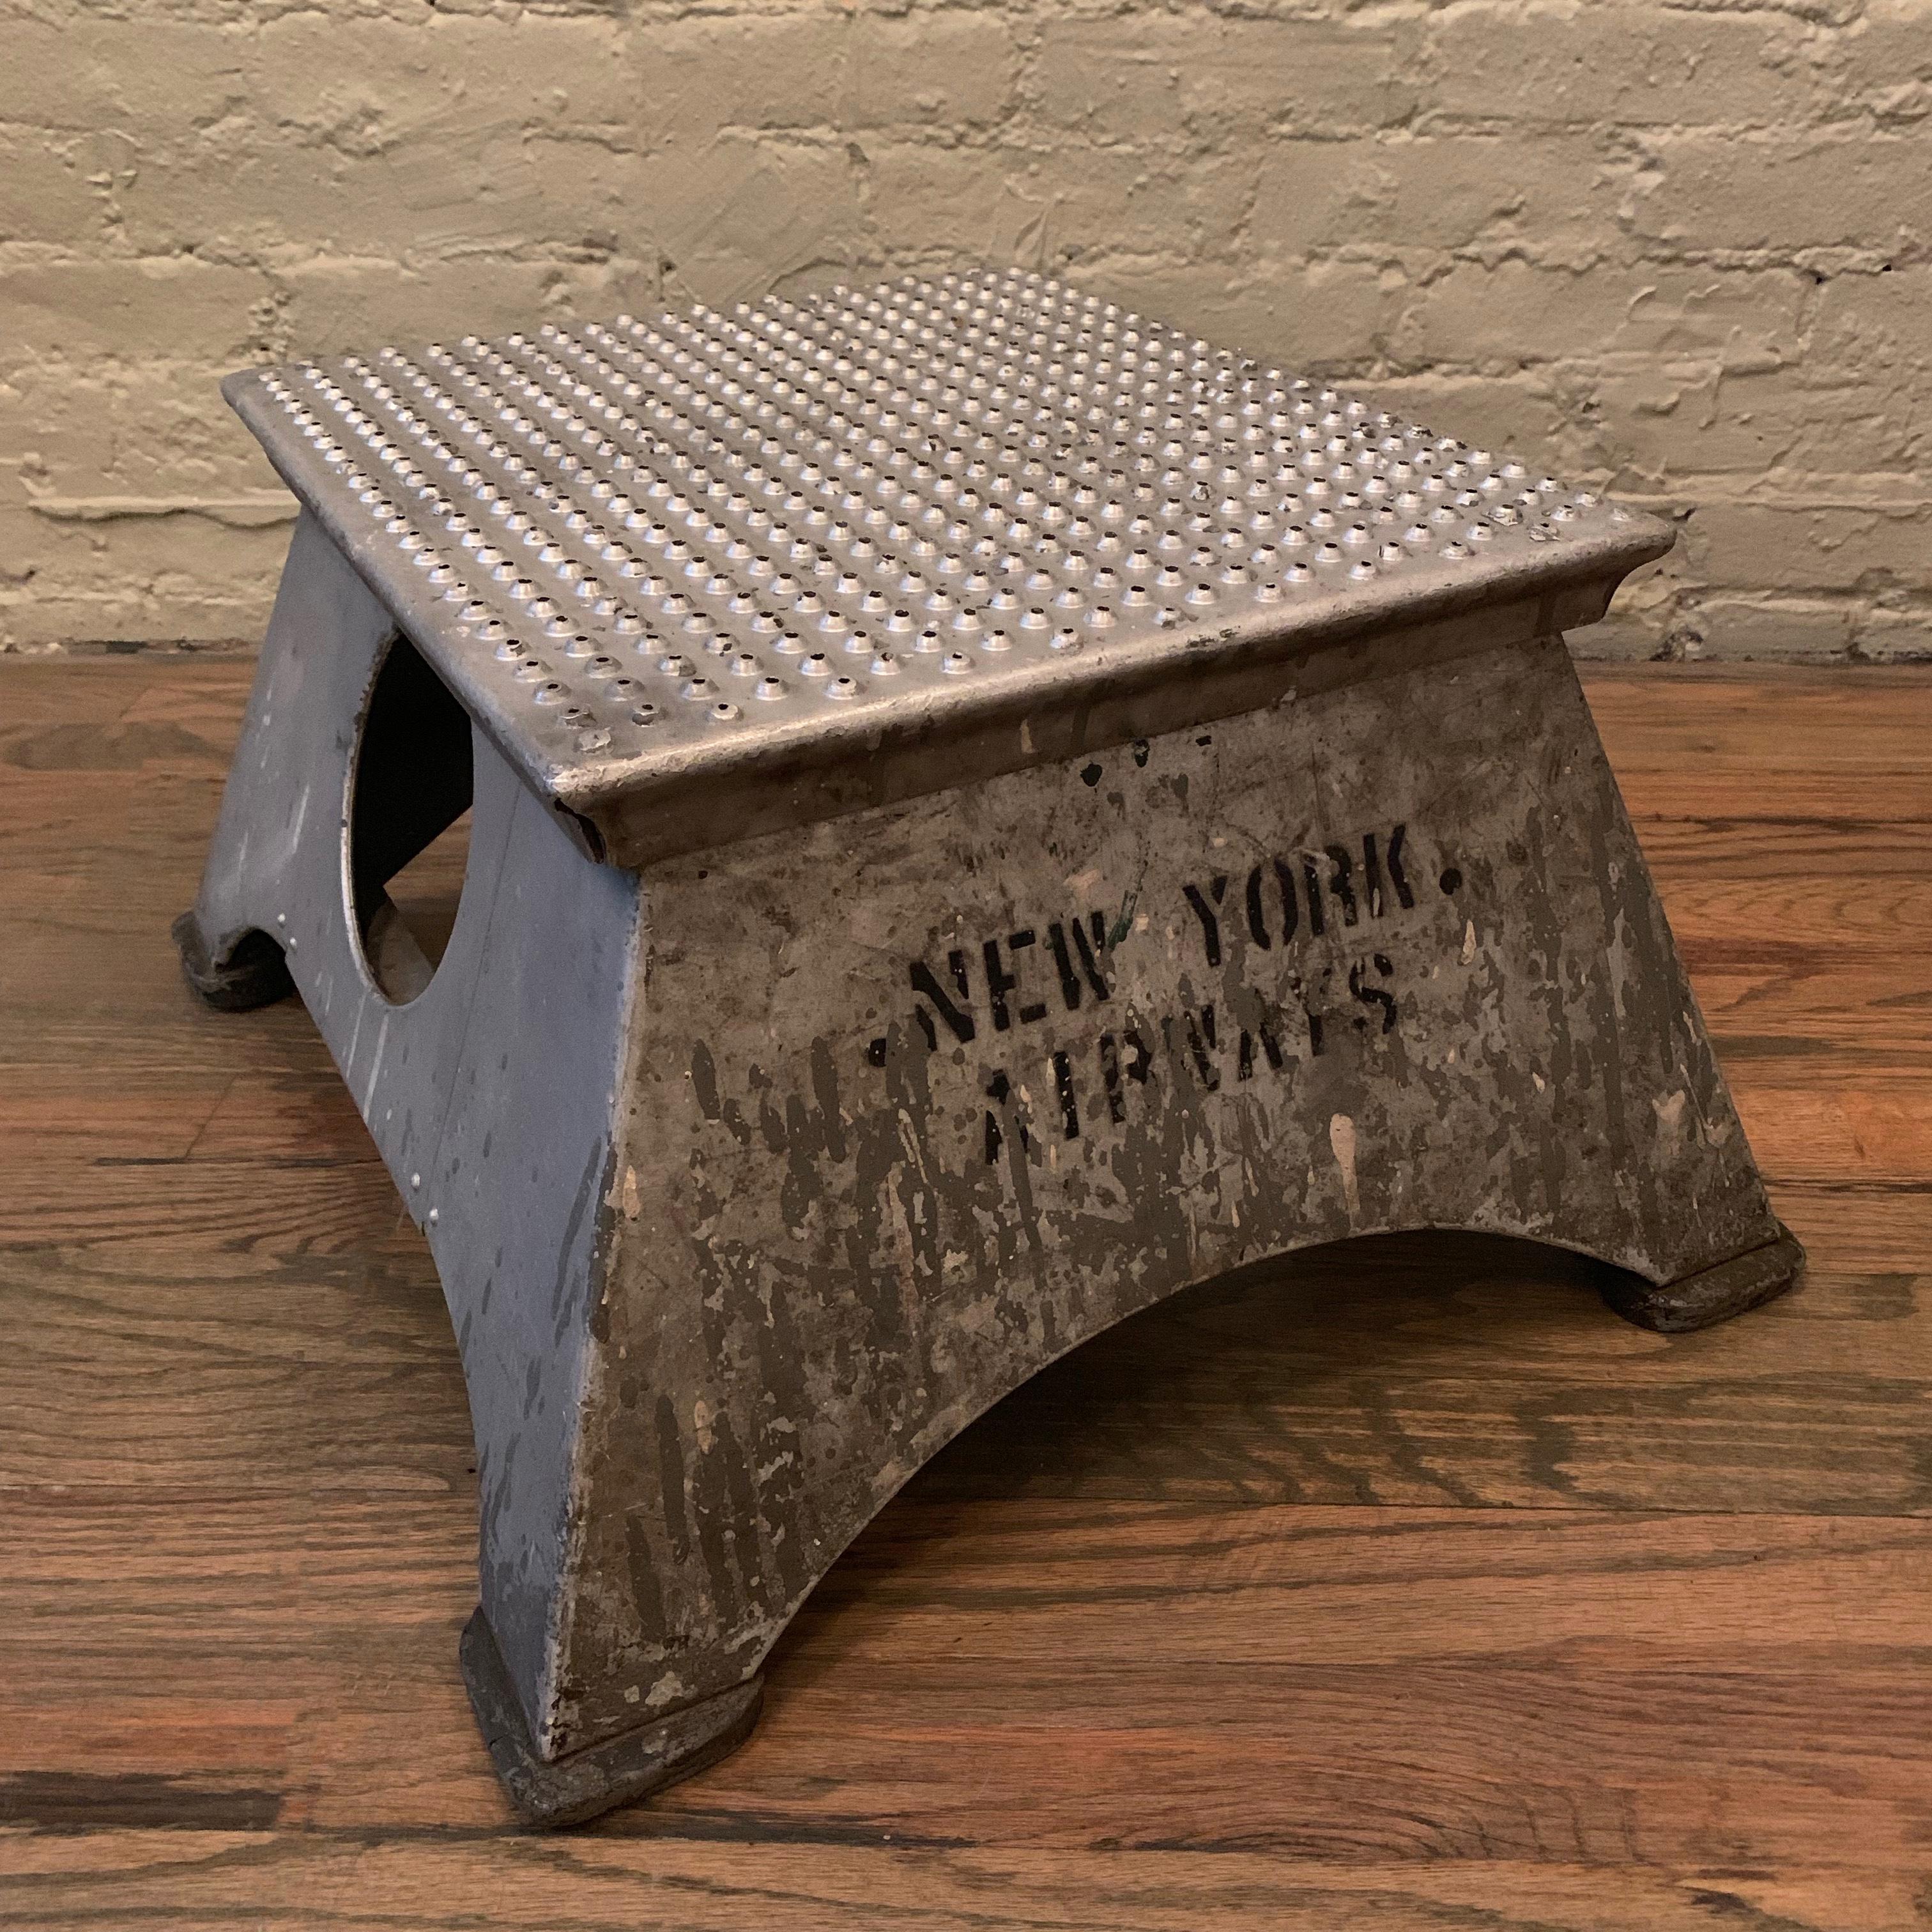 Industrial, aluminum, airplane step stool features the stamp New York Airways, (1949-1968) on one side, a perforated top and rubber glides with all original, work-worn patina. It's a piece of New York aviation history.

New York Airways was a